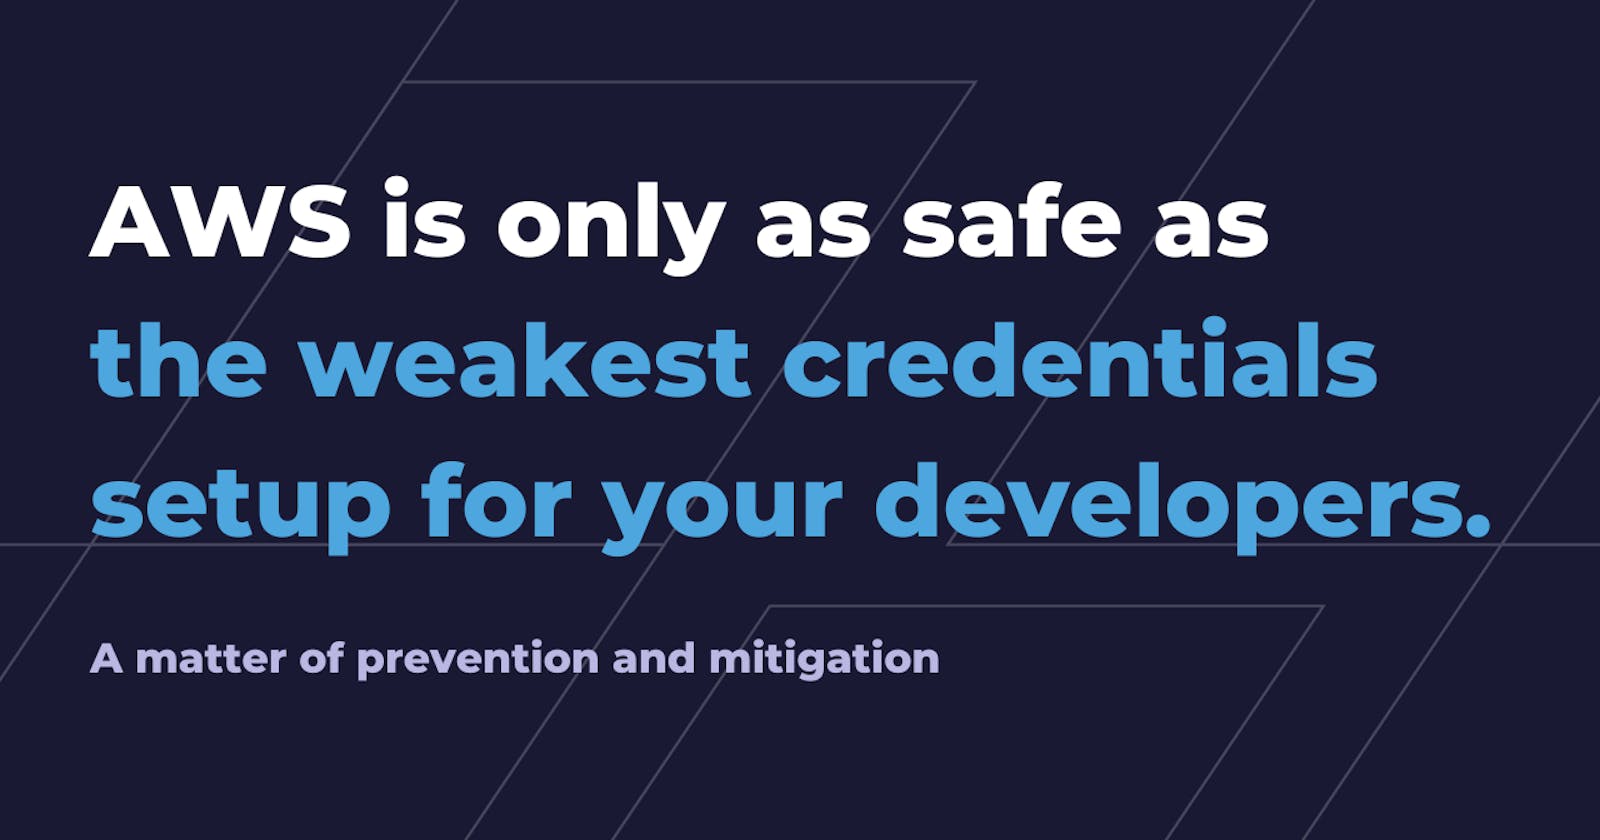 AWS is only as safe as the weakest credentials setup for your developers.